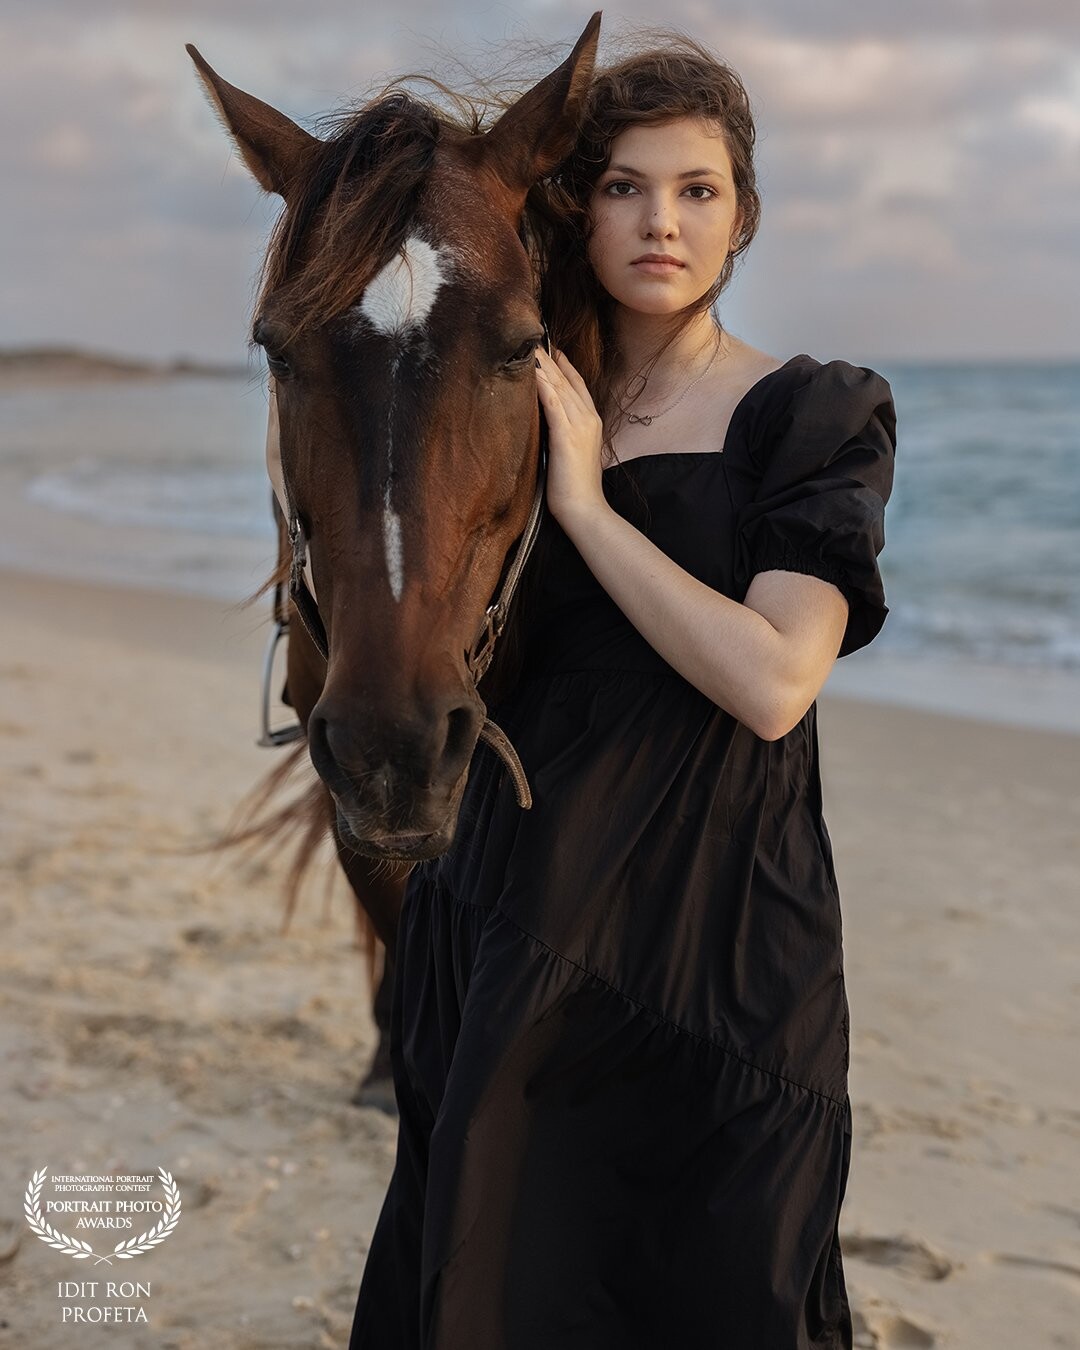 The picture was taken on my daughter's 15th birthday, she loves animals very much, she had a dream to be photographed with horses and I made it come true for her, in the picture she is photographed with the beautiful Zoro.